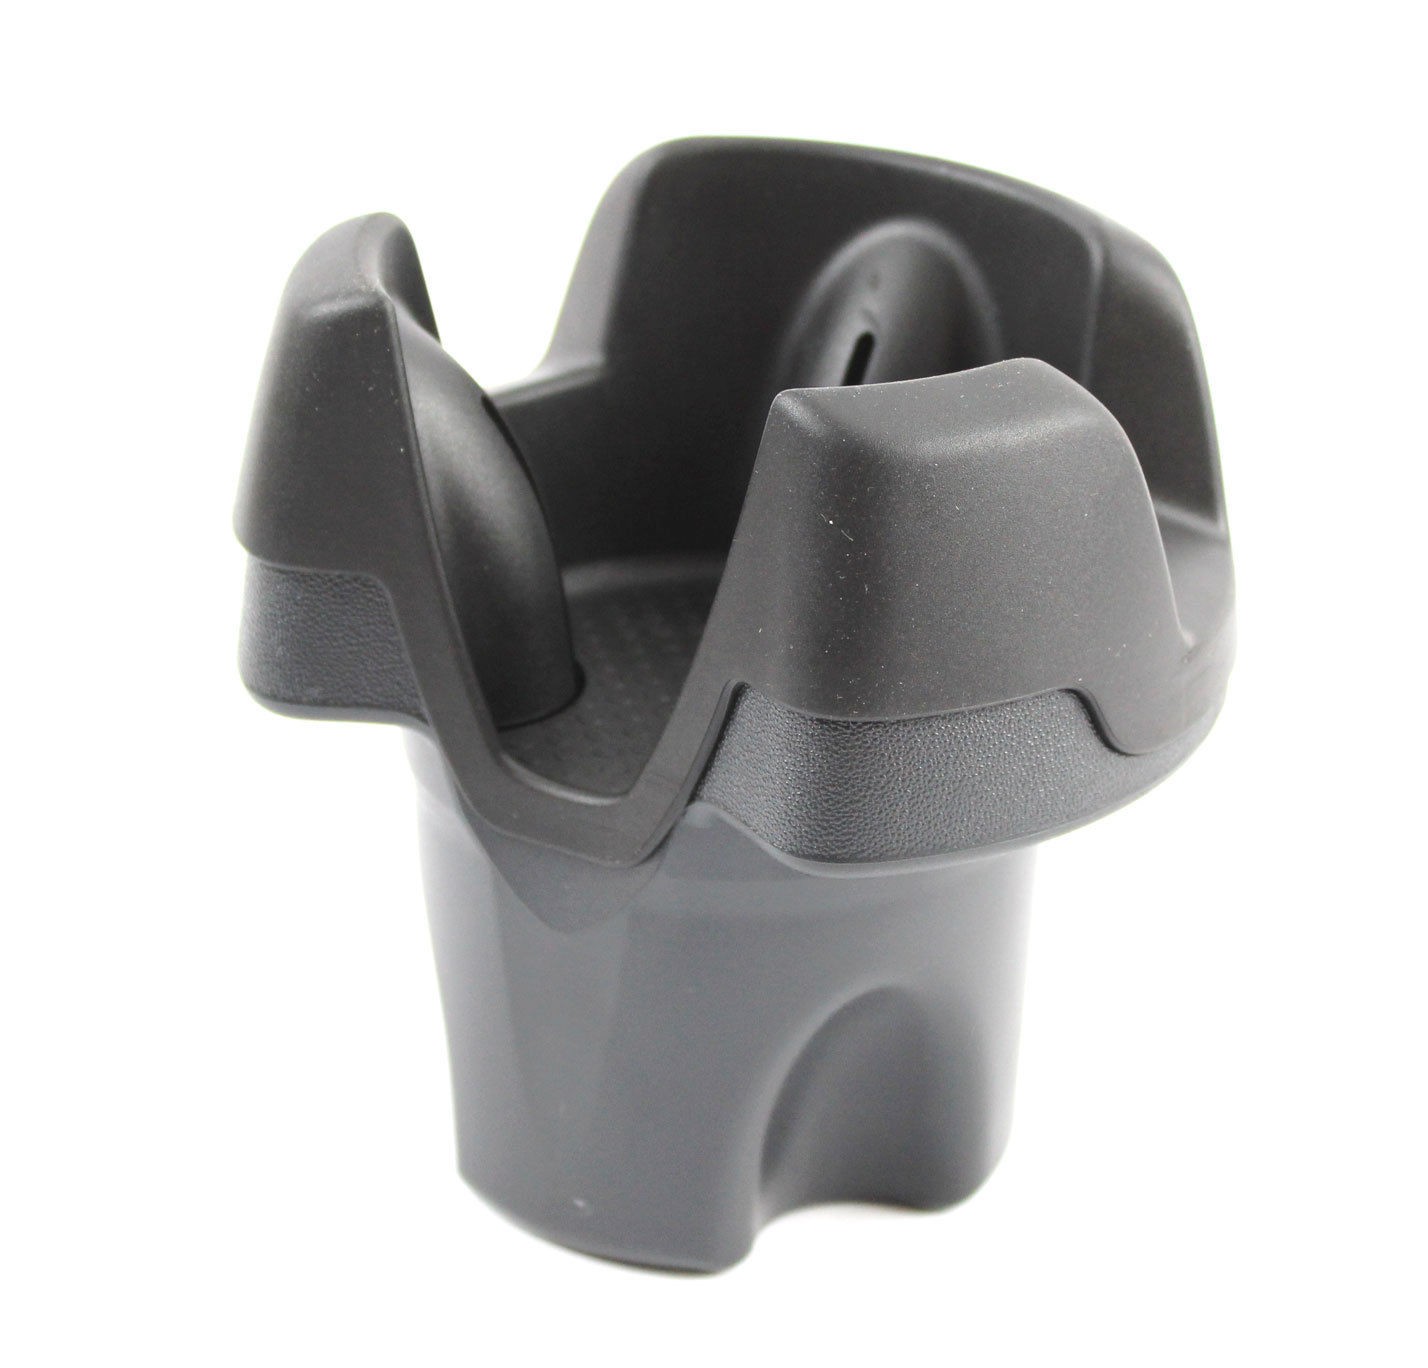 Fhdpeebu Drink Holder Cup Holder Automotive for FORTWO 451 A4518100370